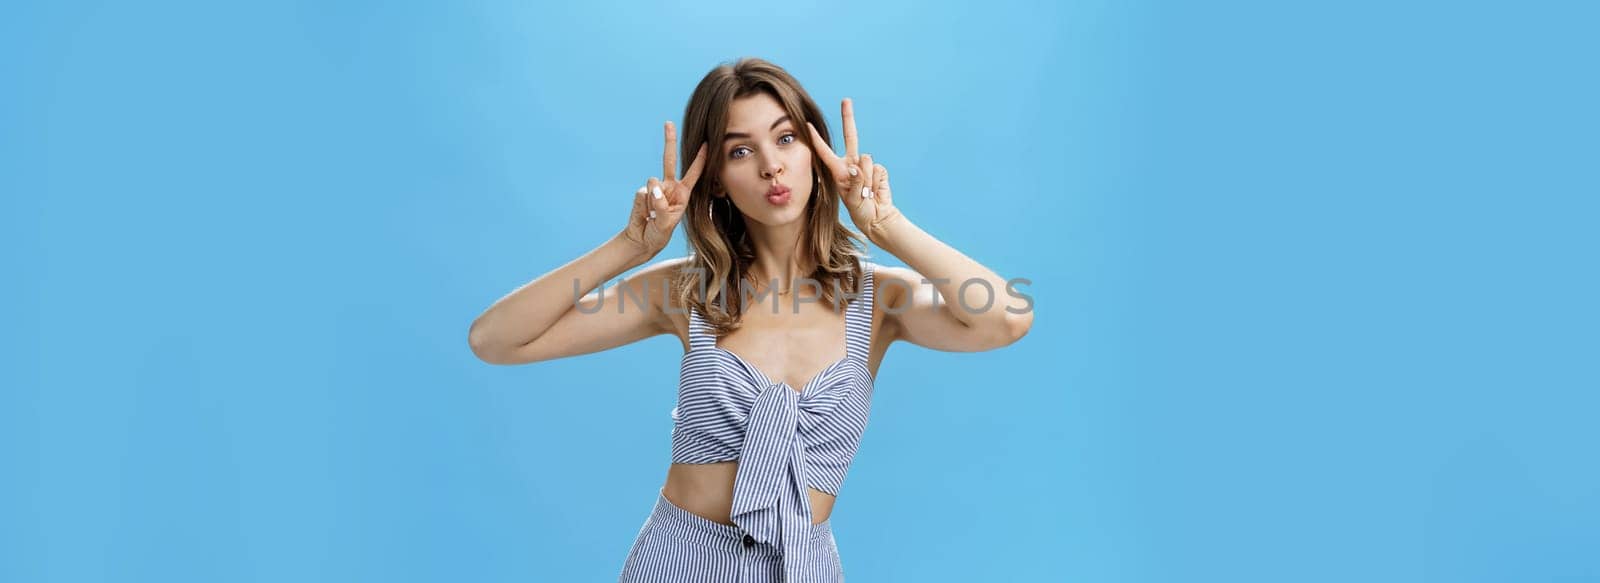 Charming cute unretouched woman with chestnut hair and tattoo showing peace gestures near face folding lips in mwah making silly face while posing over blue background confident and carefree by Benzoix